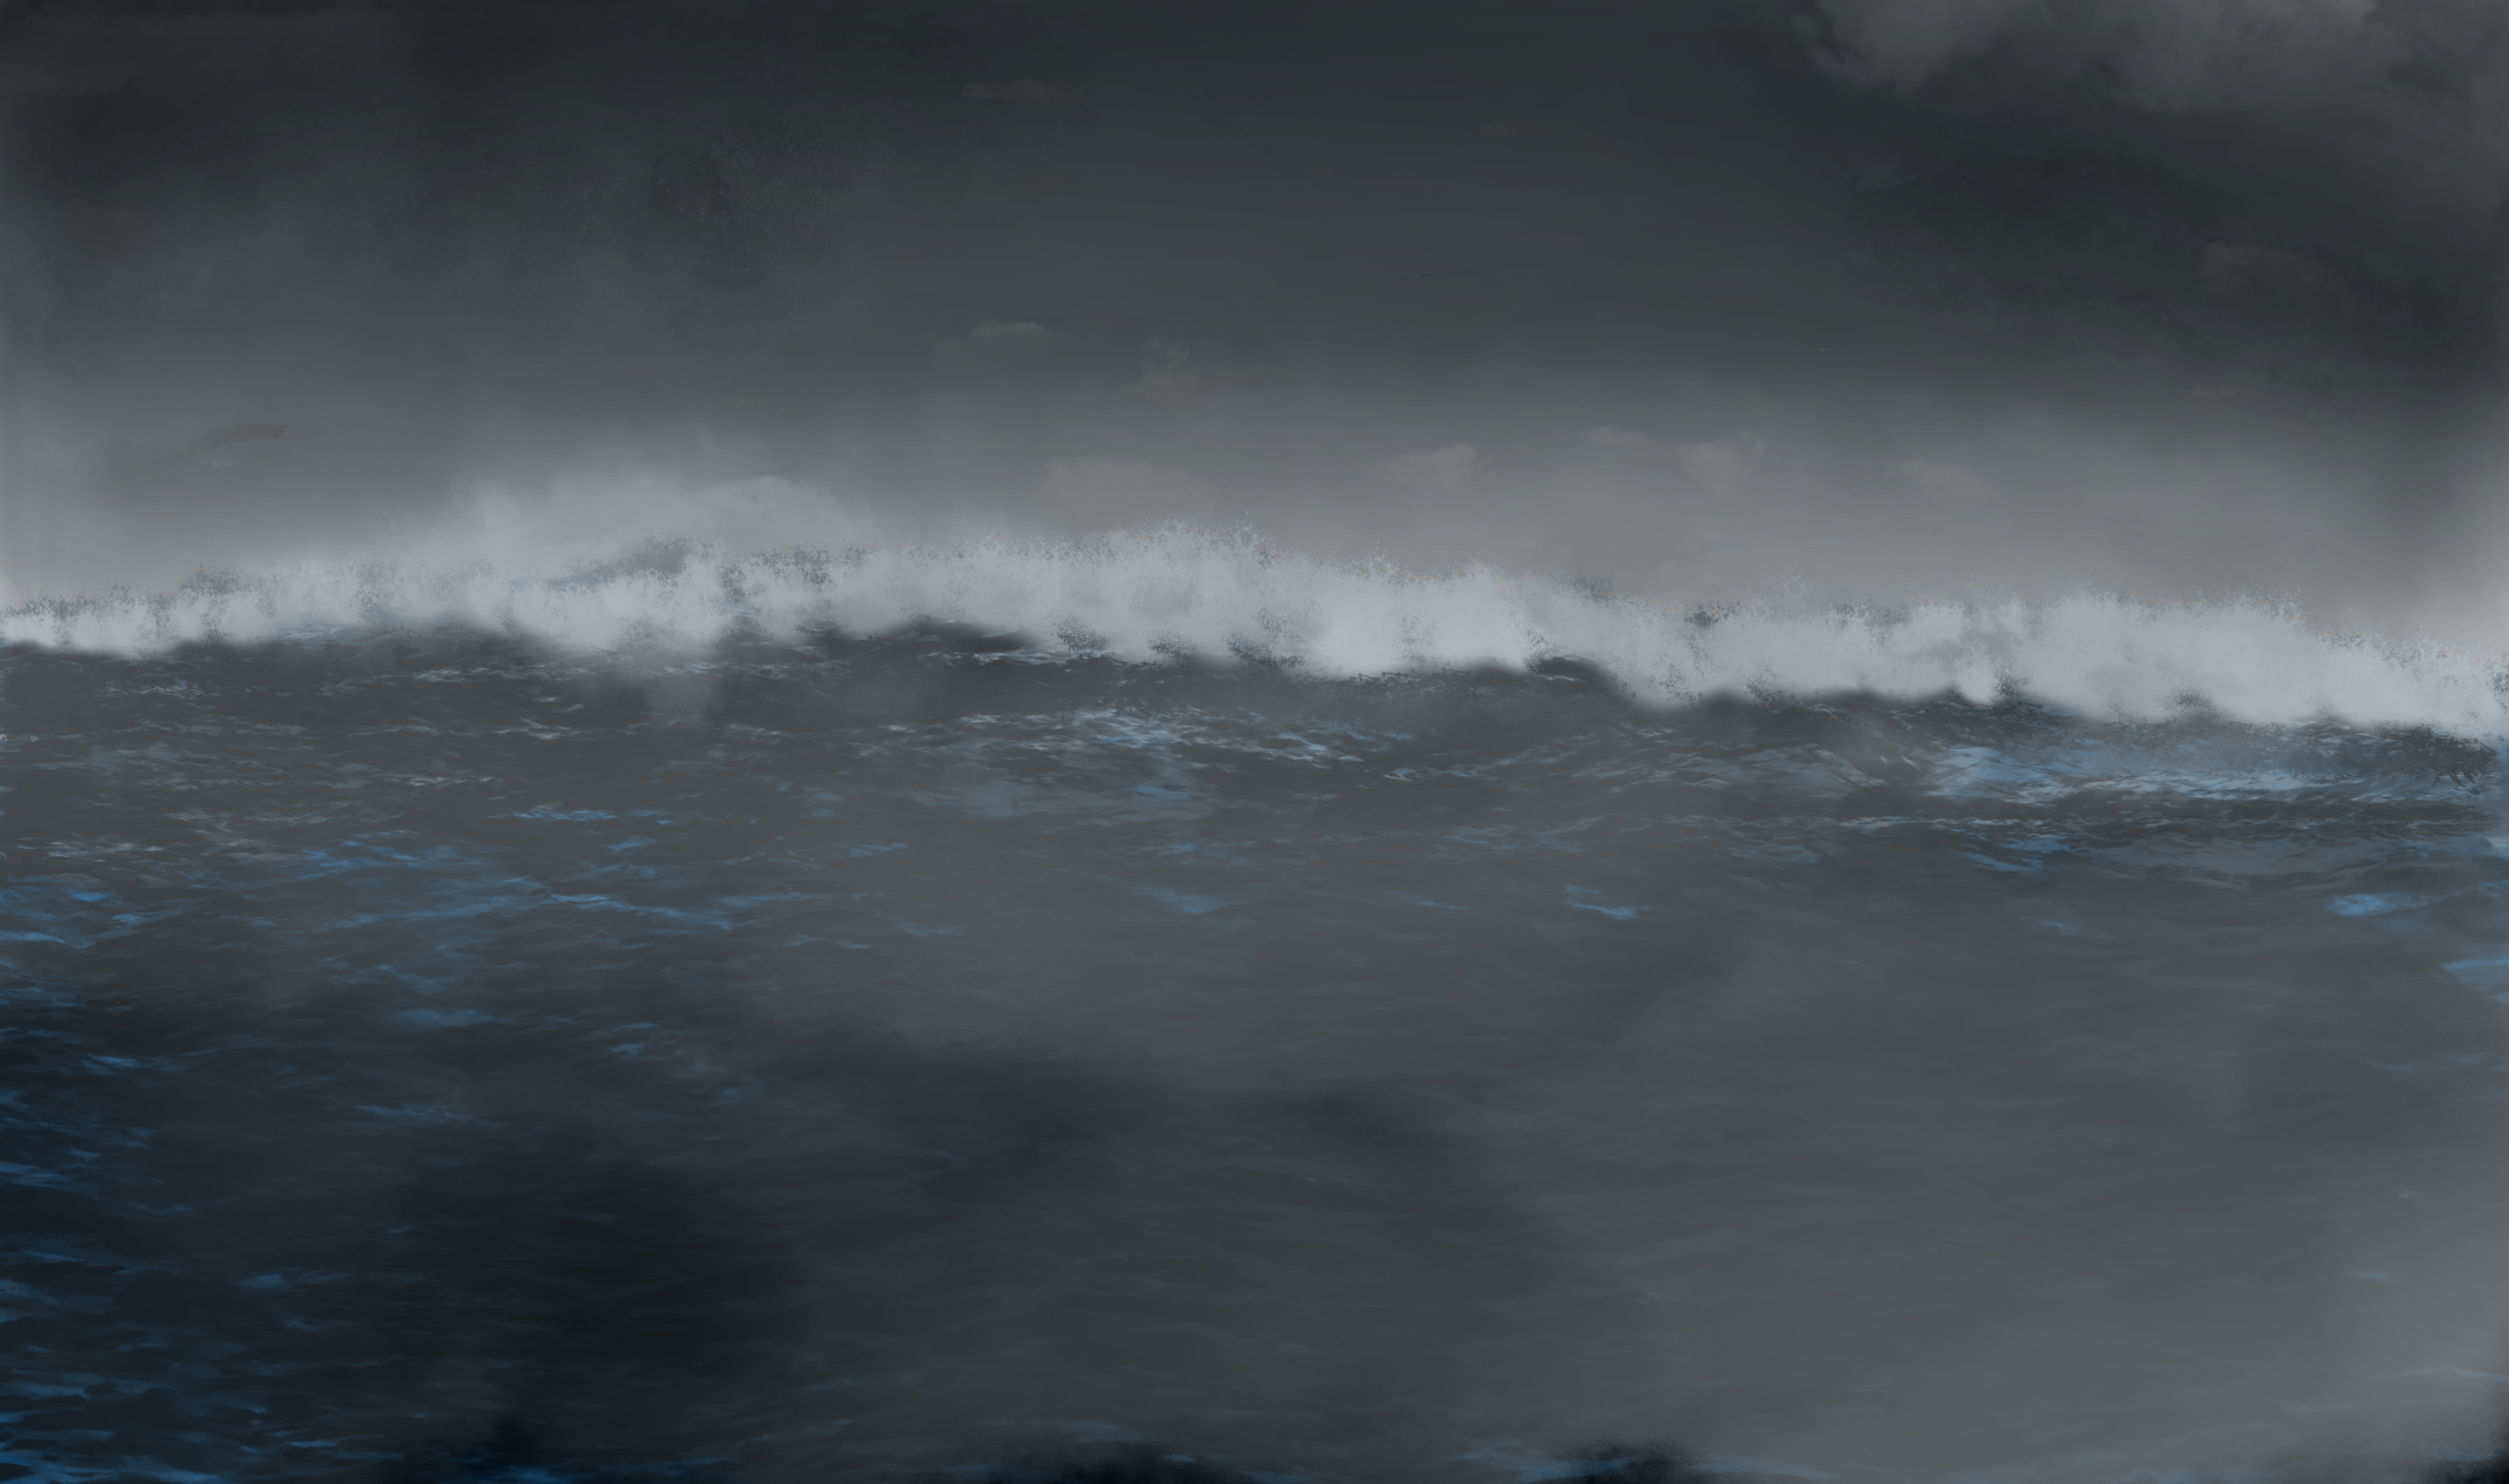 A digital painting of a large wave on a stormy day, the wave appears to be rolling towards the viewer.